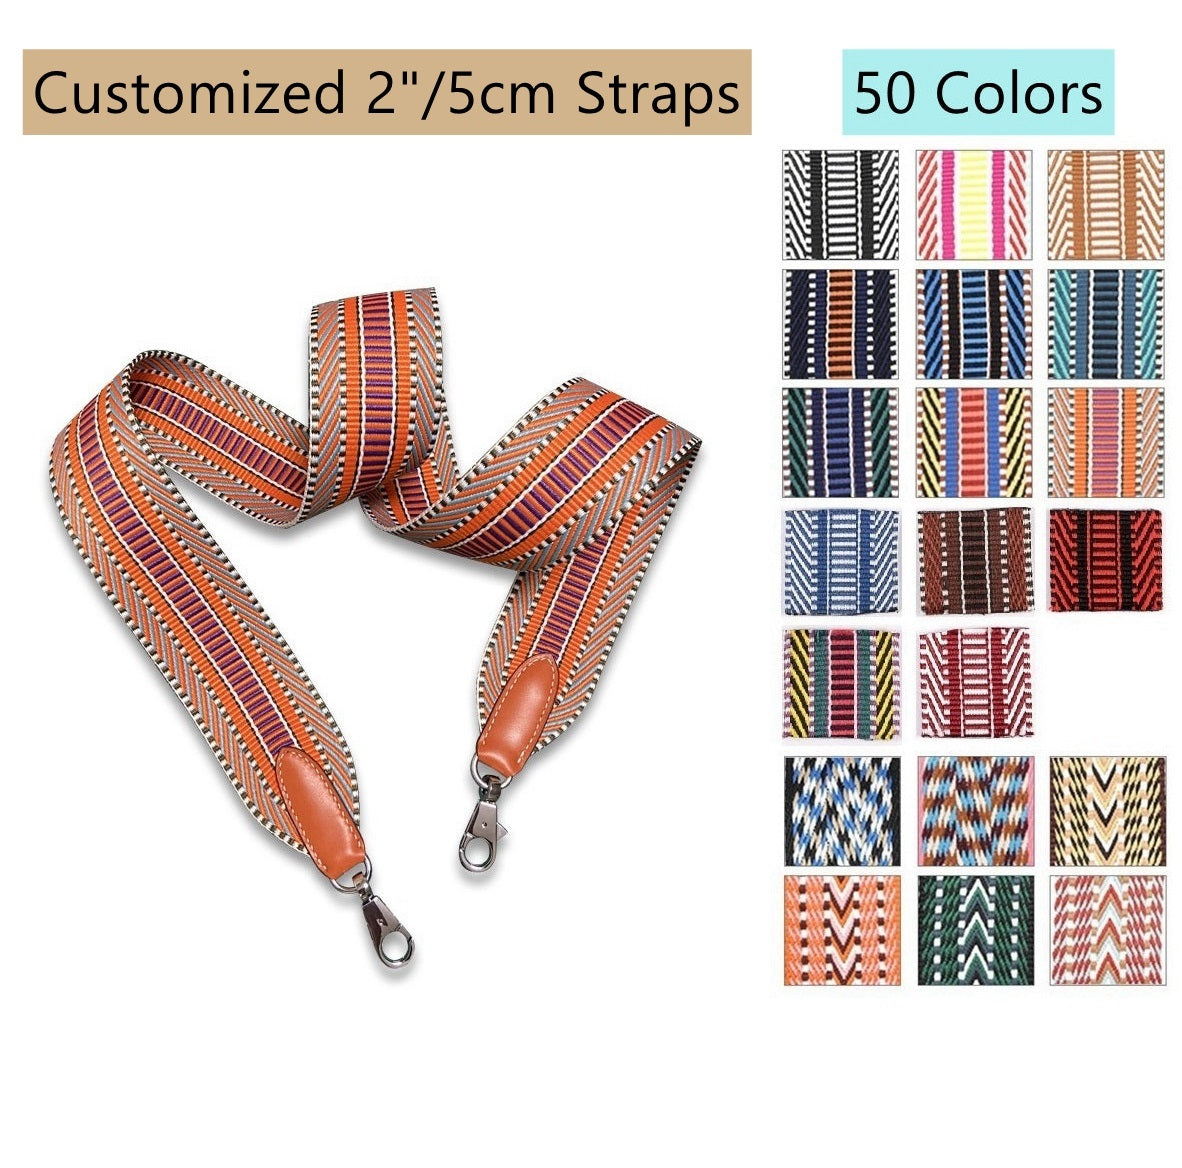 Customized 5cm/2" Sangle bag straps, 50 Colors+ - Awulook